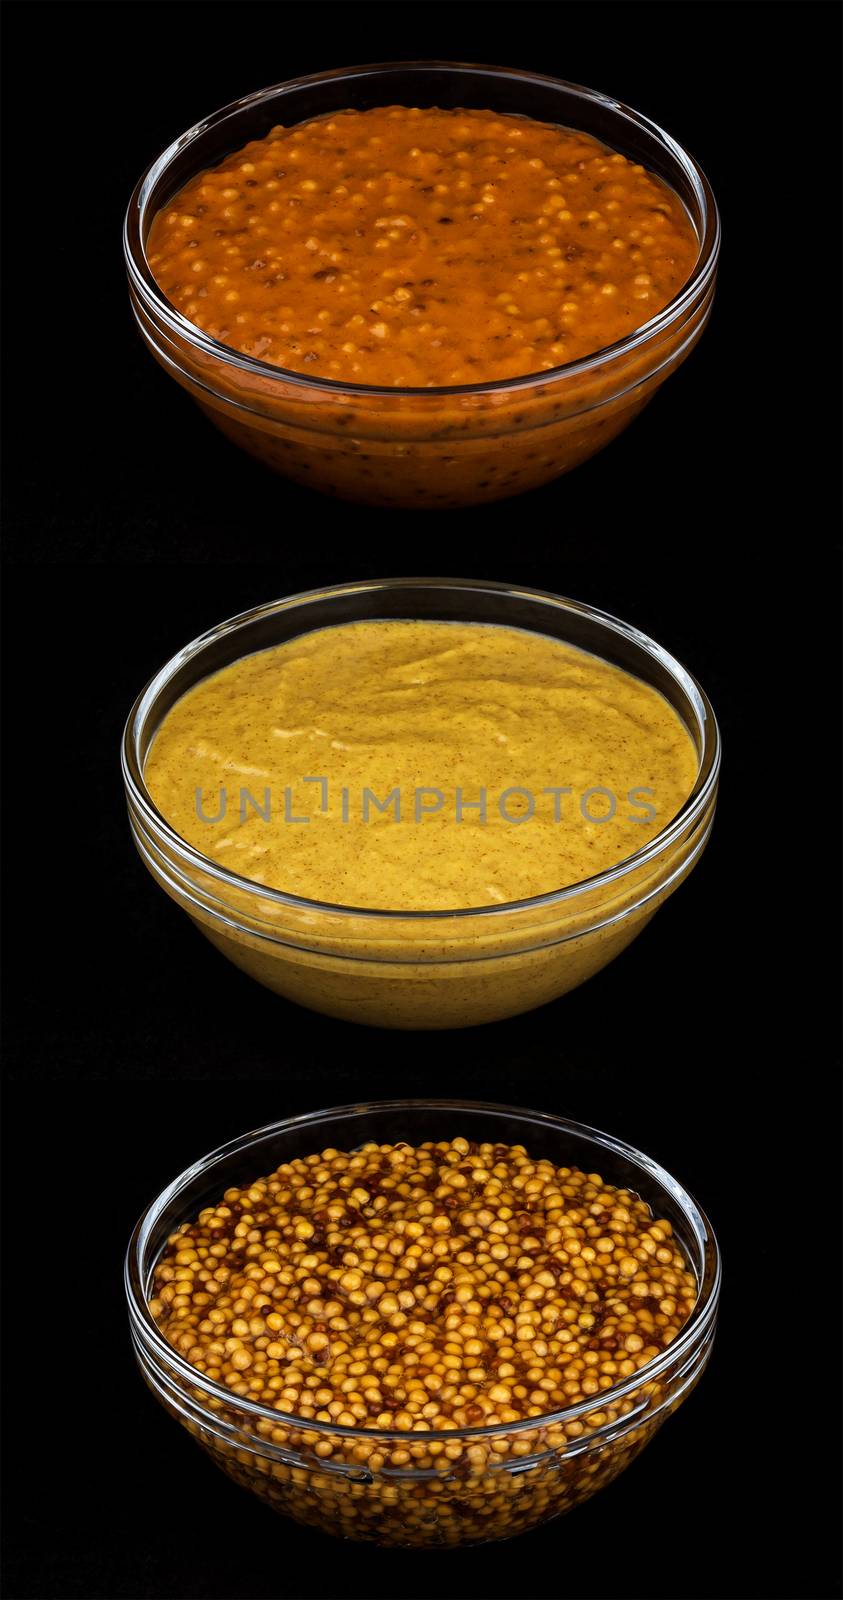 Set of various types of mustard on black background